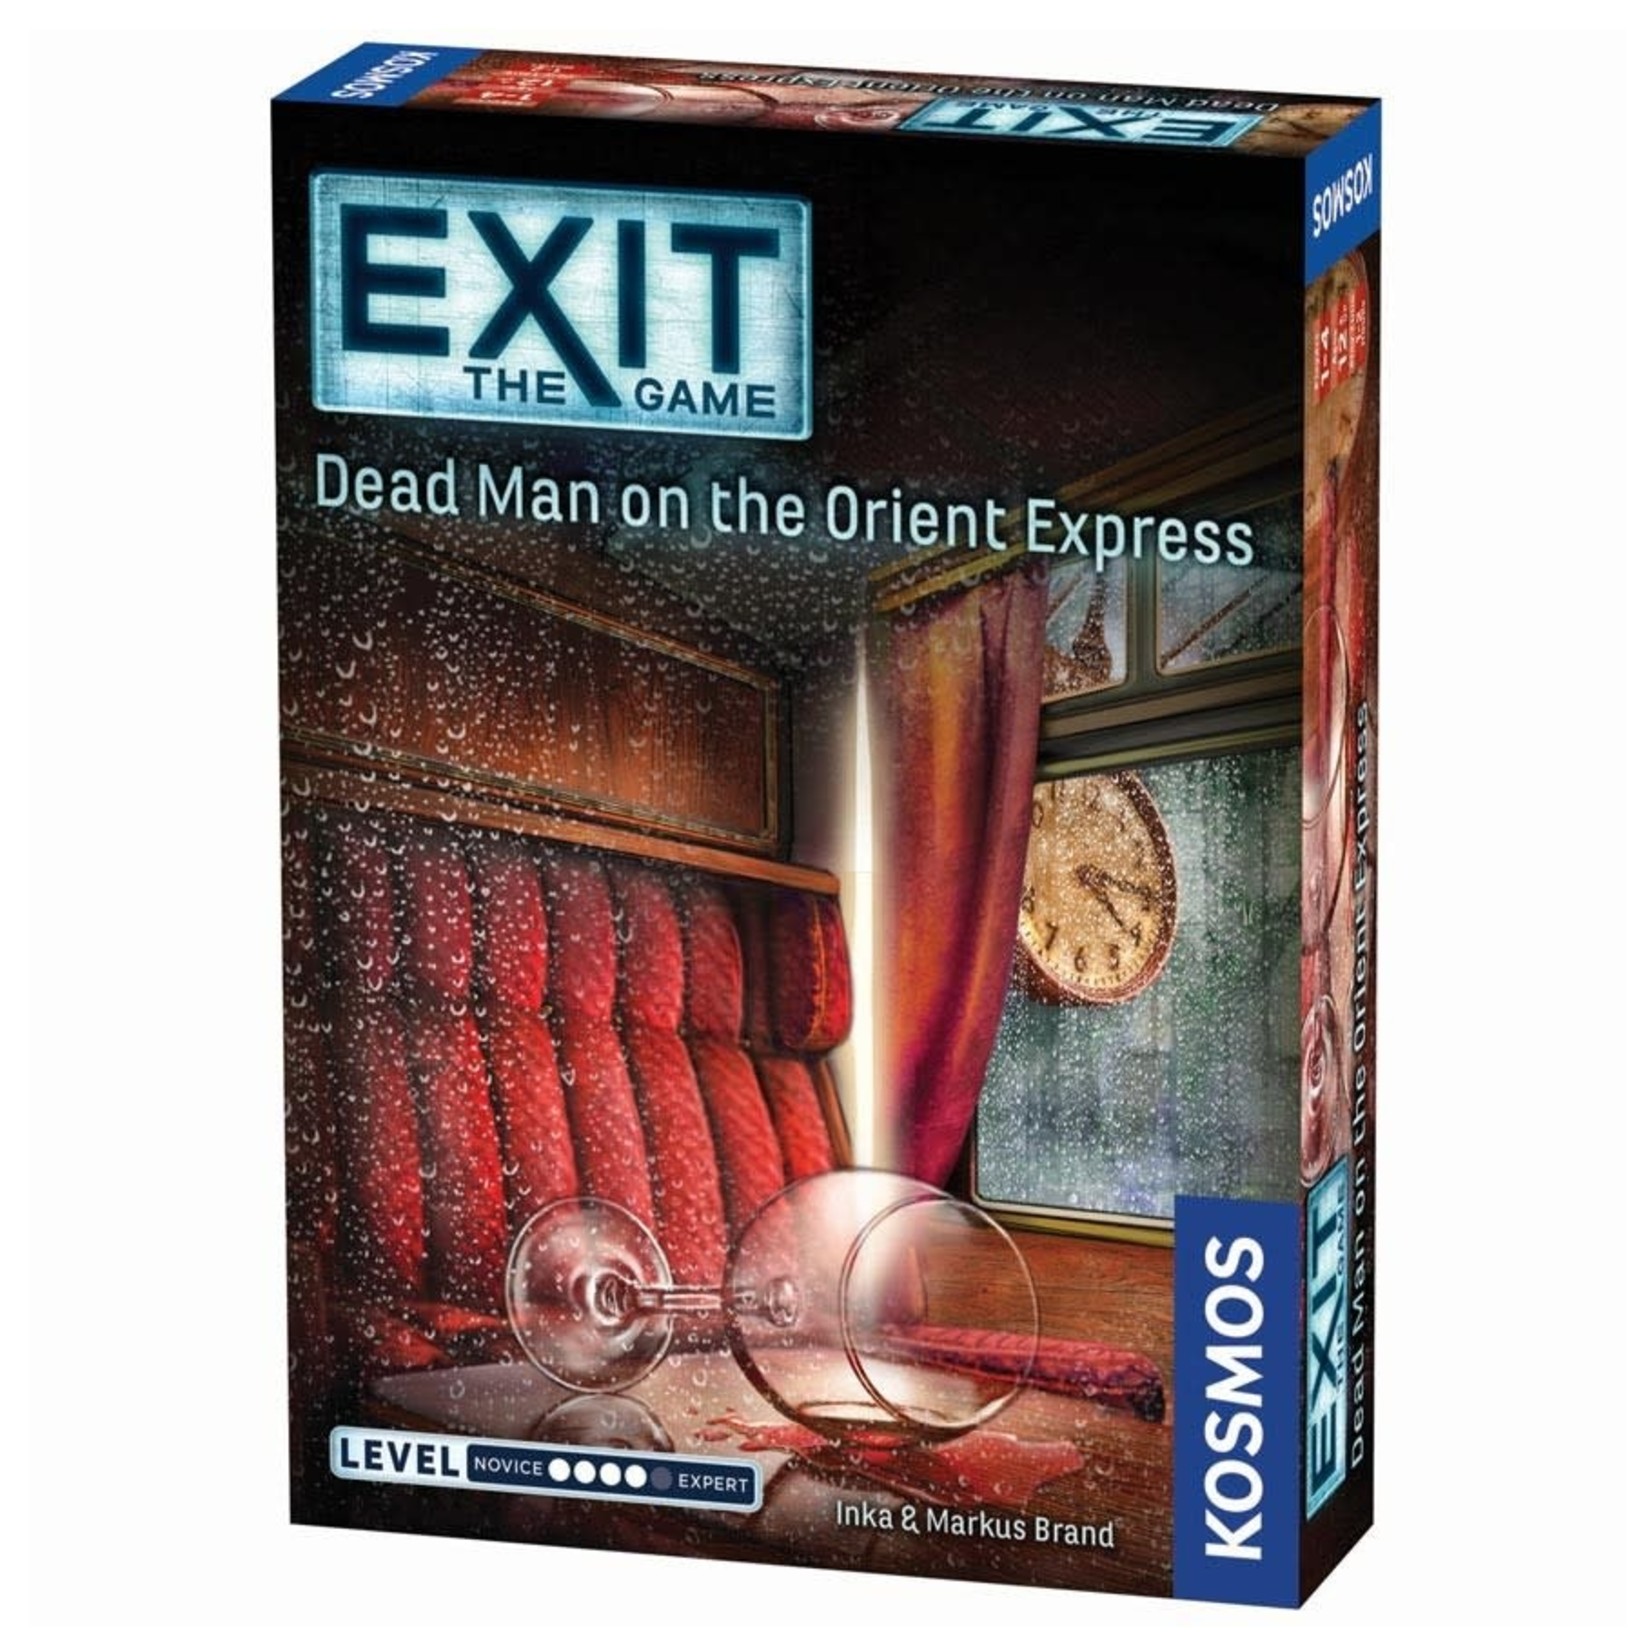 Thames & Kosmos Exit The Game: Dead Man on the Orient Express